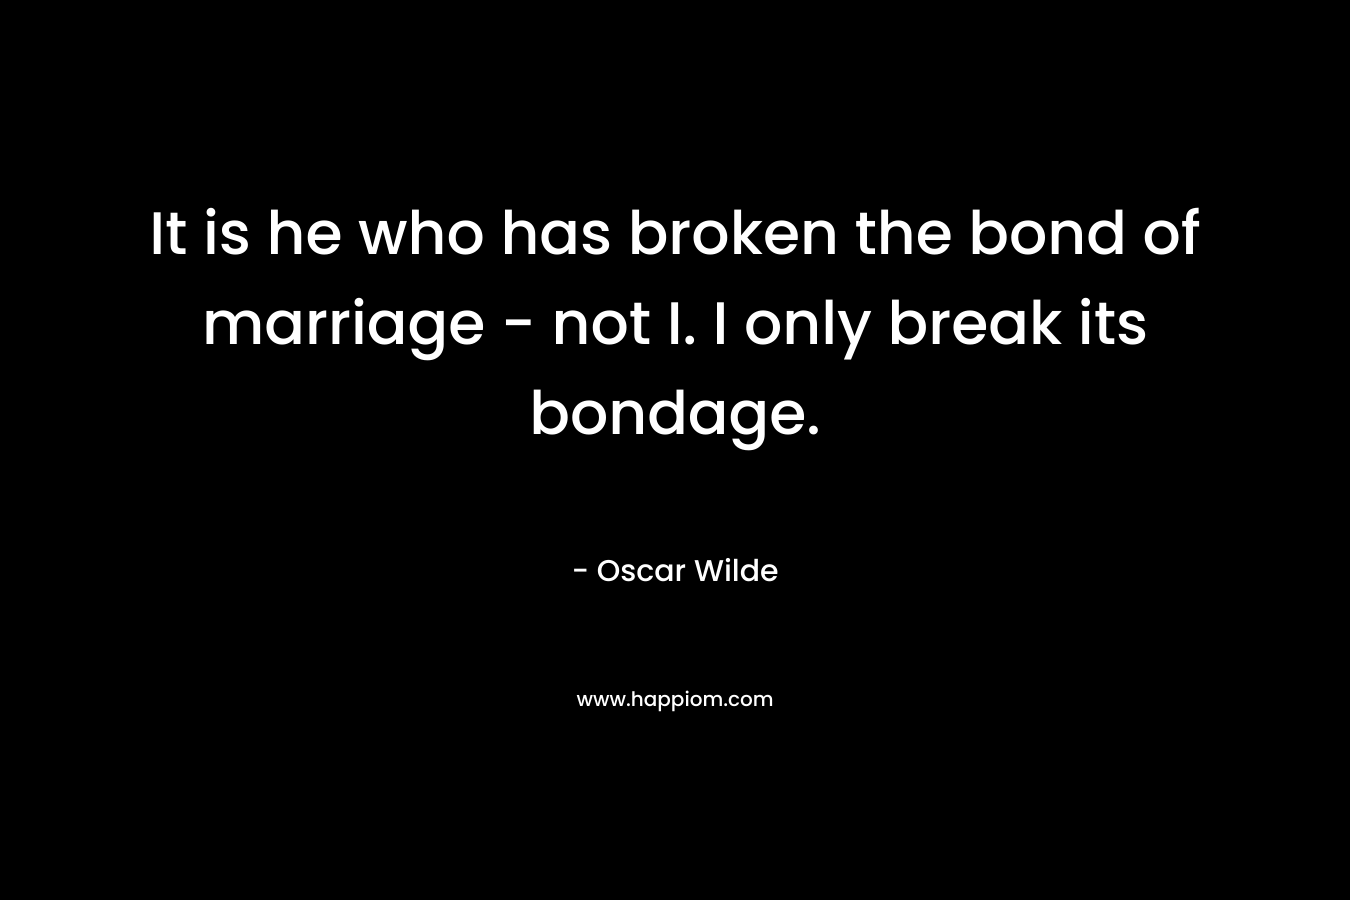 It is he who has broken the bond of marriage - not I. I only break its bondage.